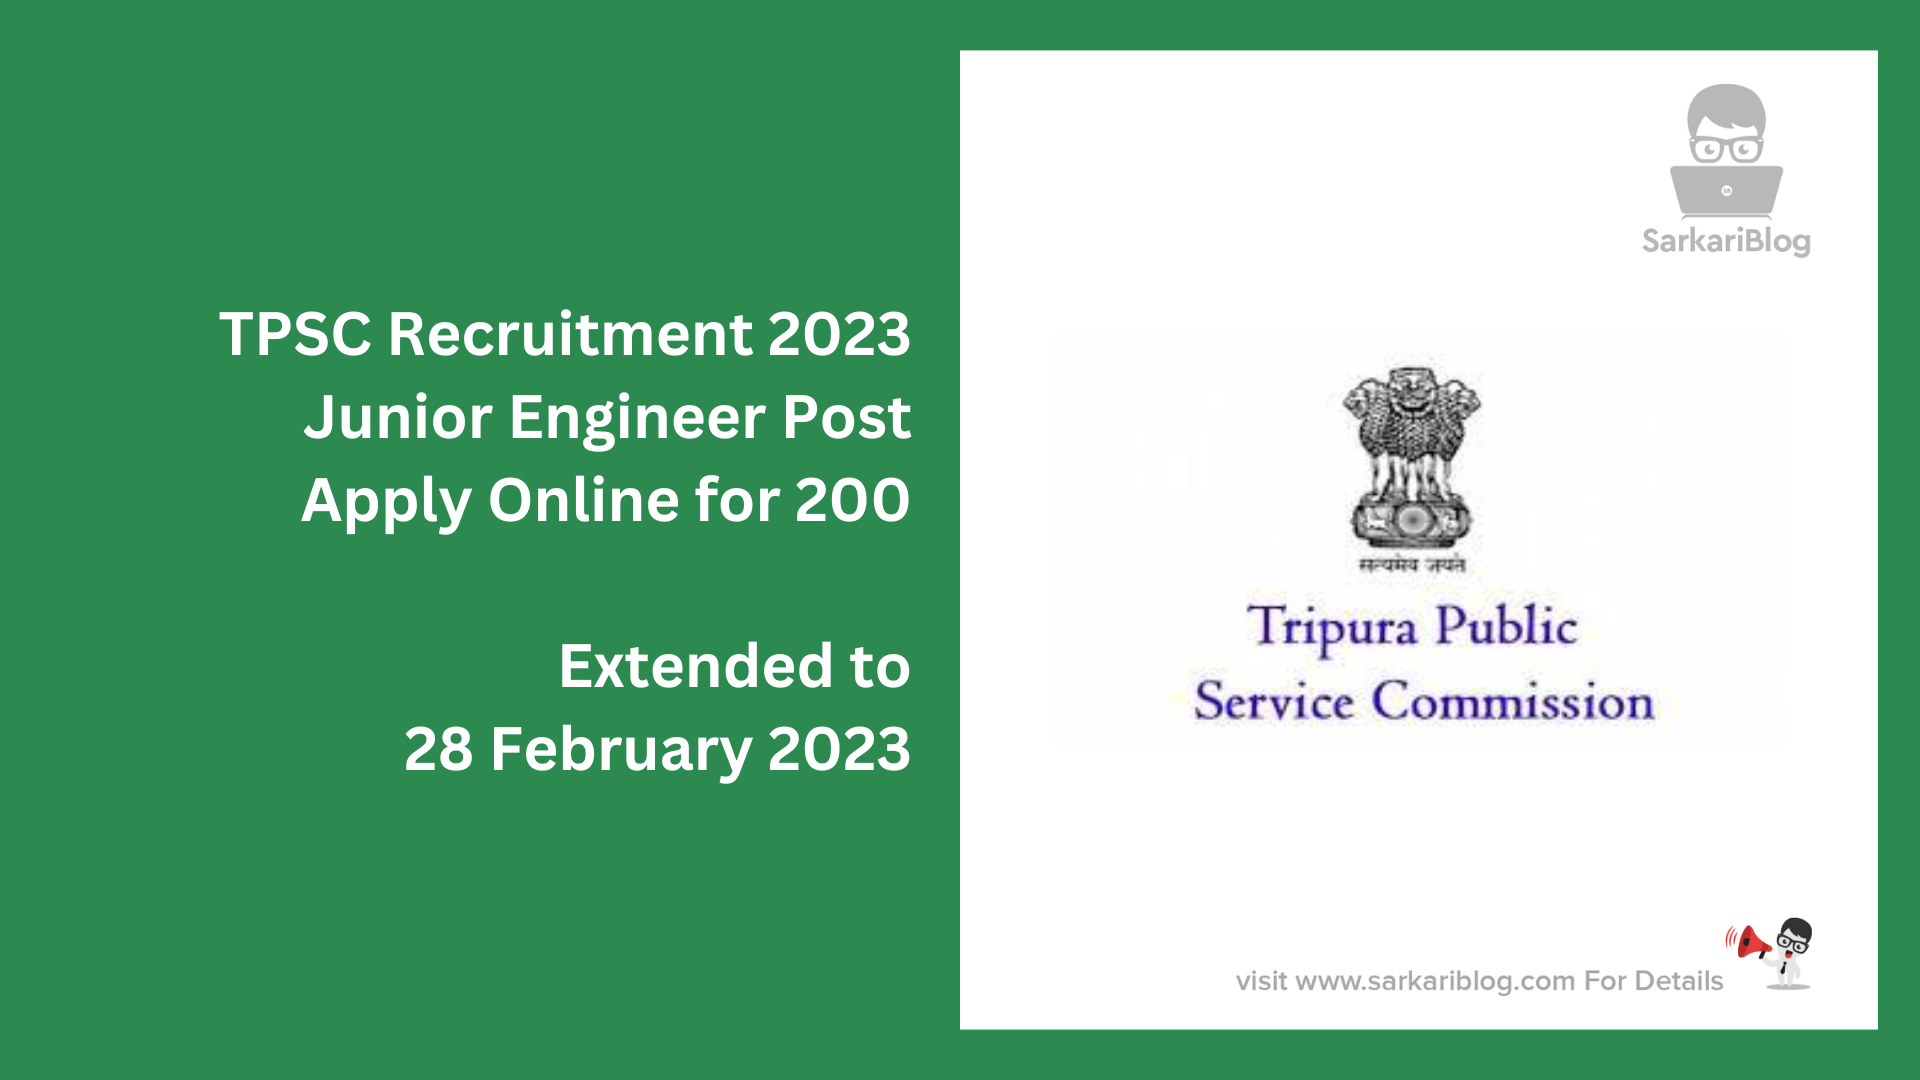 TPSC JE Recruitment 2023 Notification